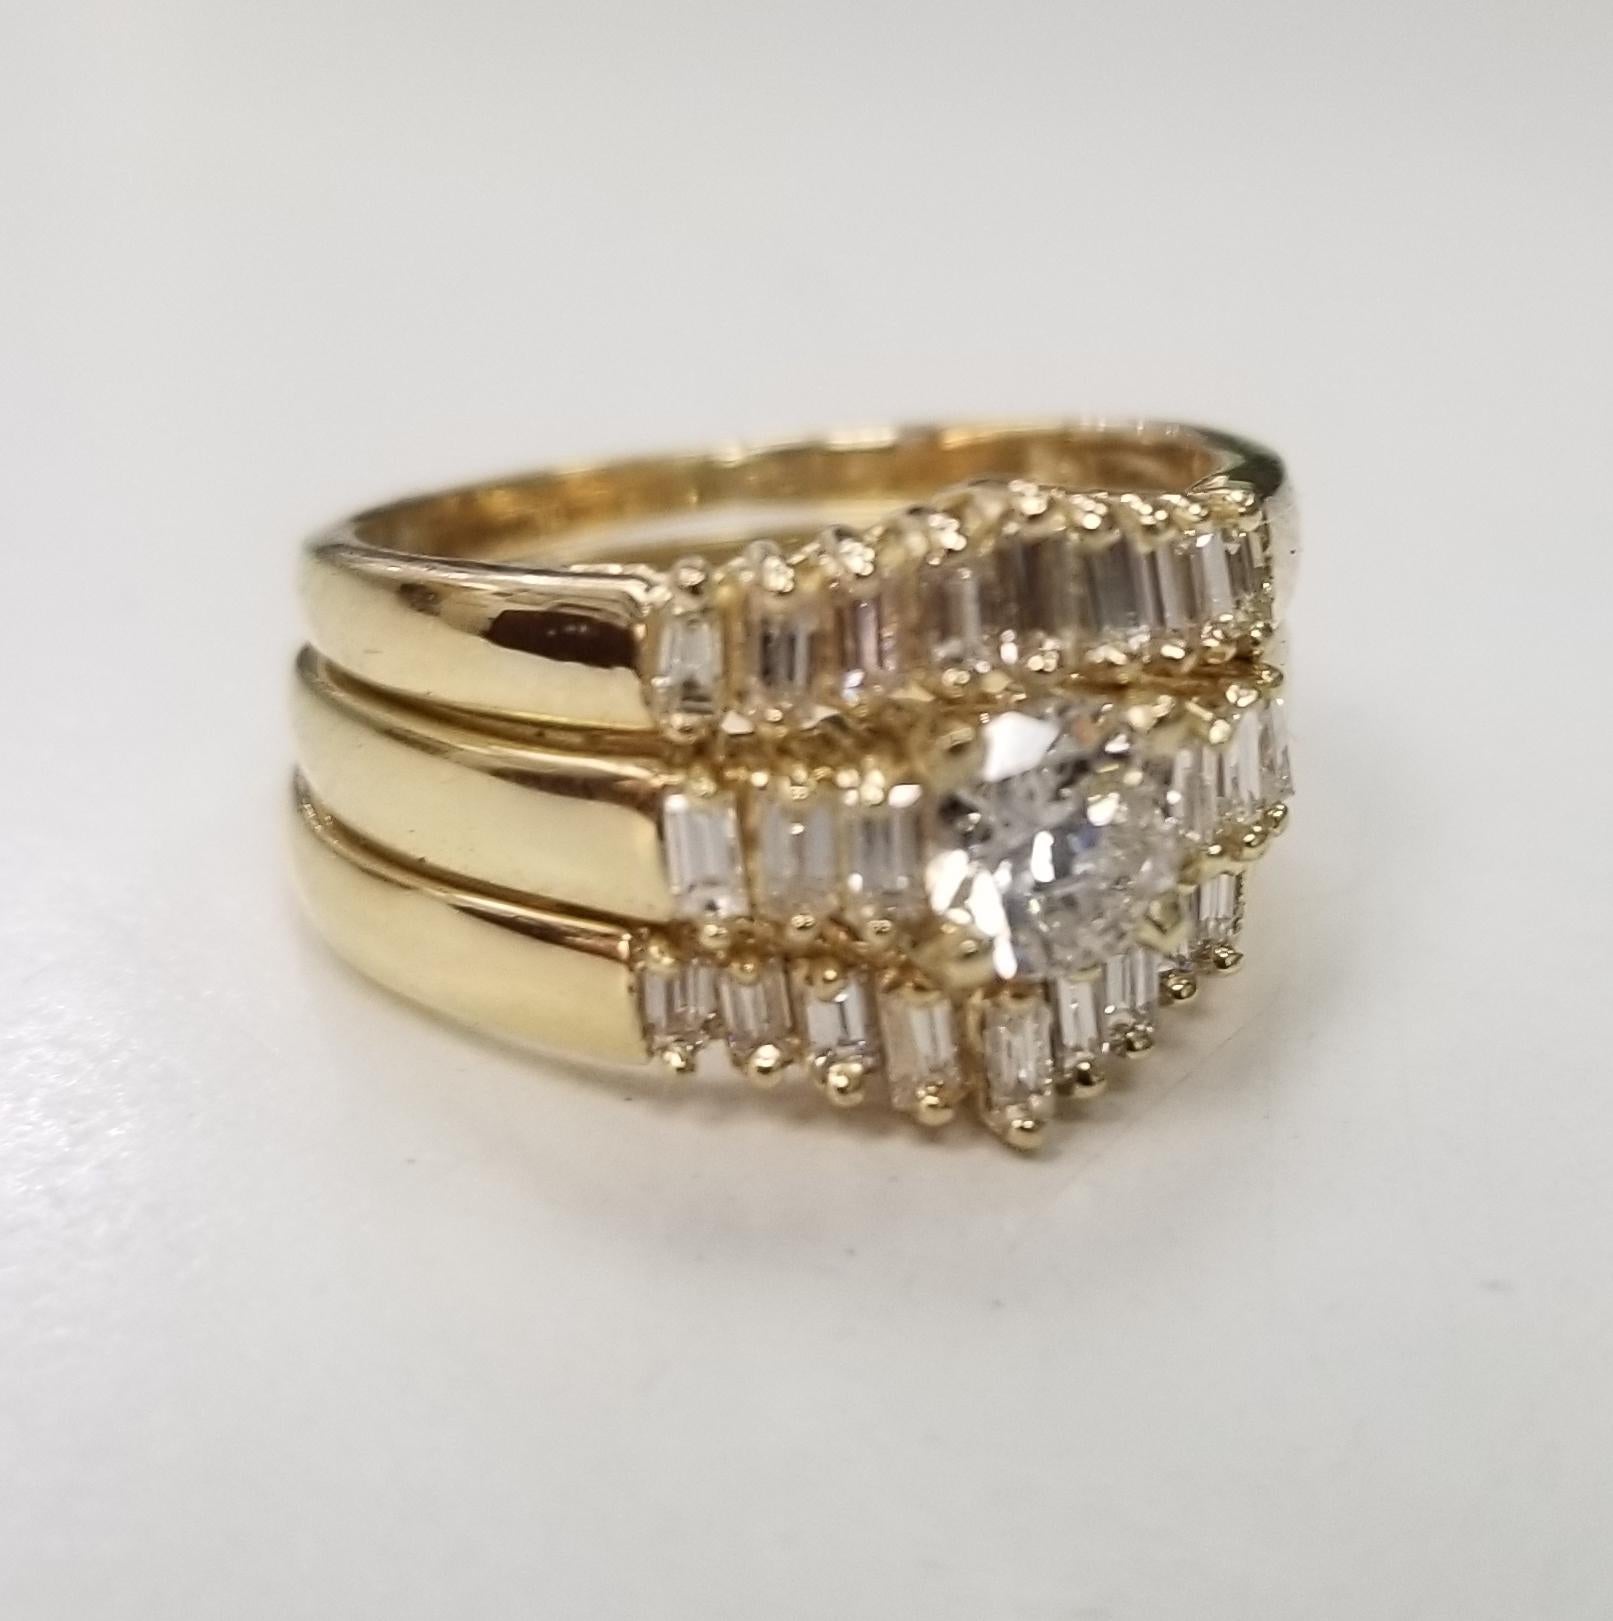 14k yellow gold diamond baguette ring with 2 guard rings, containing 1 brilliant cut diamond; color 